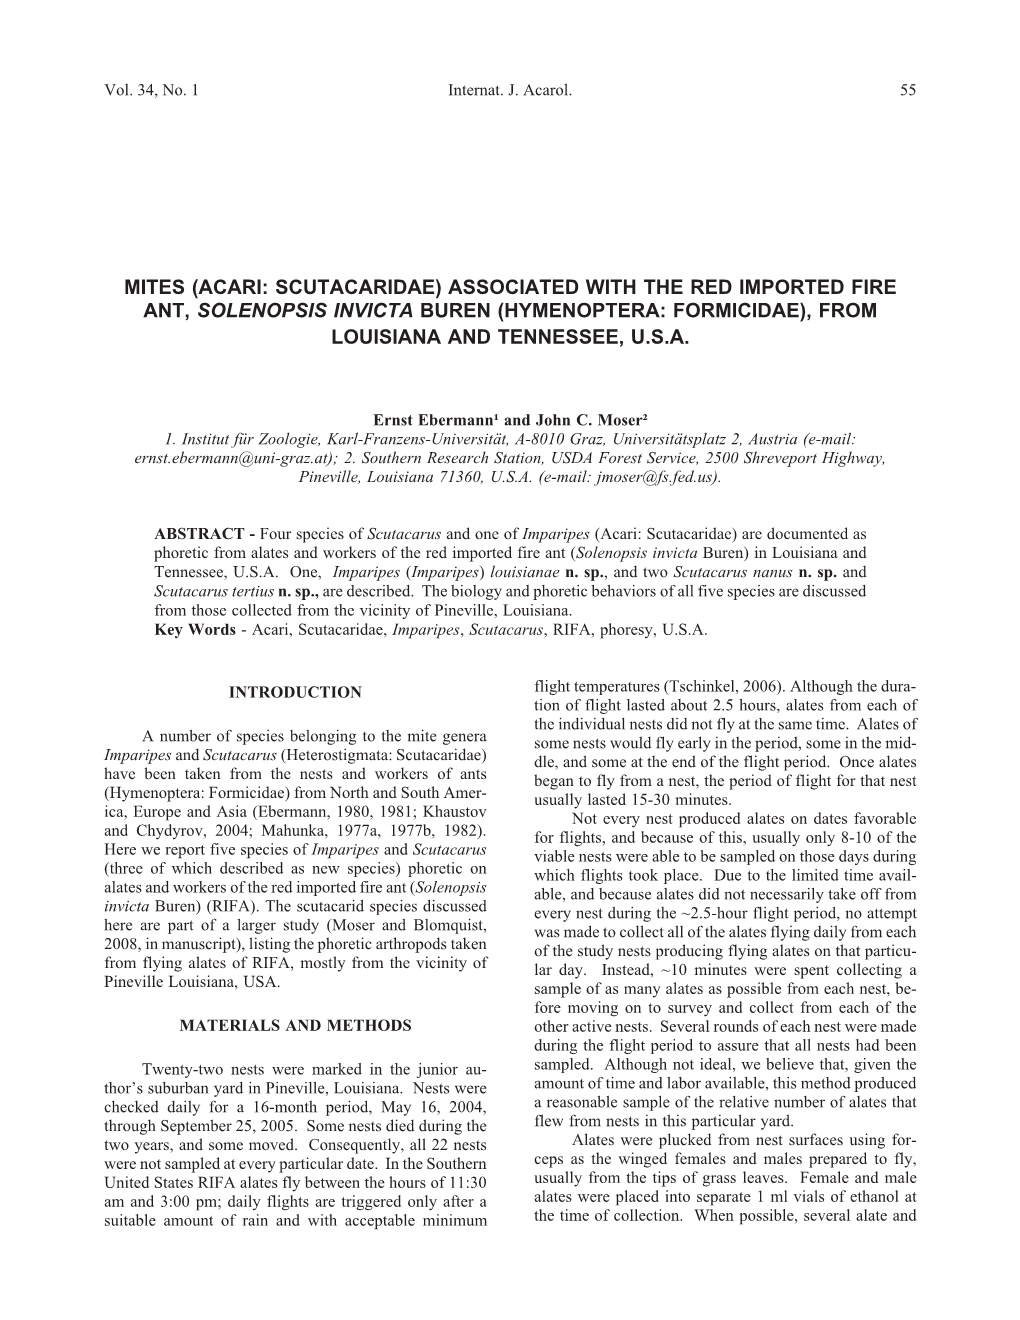 Mites (Acari: Scutacaridae) Associated with the Red Imported Fire Ant, Solenopsis Invicta Buren (Hymenoptera: Formicidae), from Louisiana and Tennessee, U.S.A